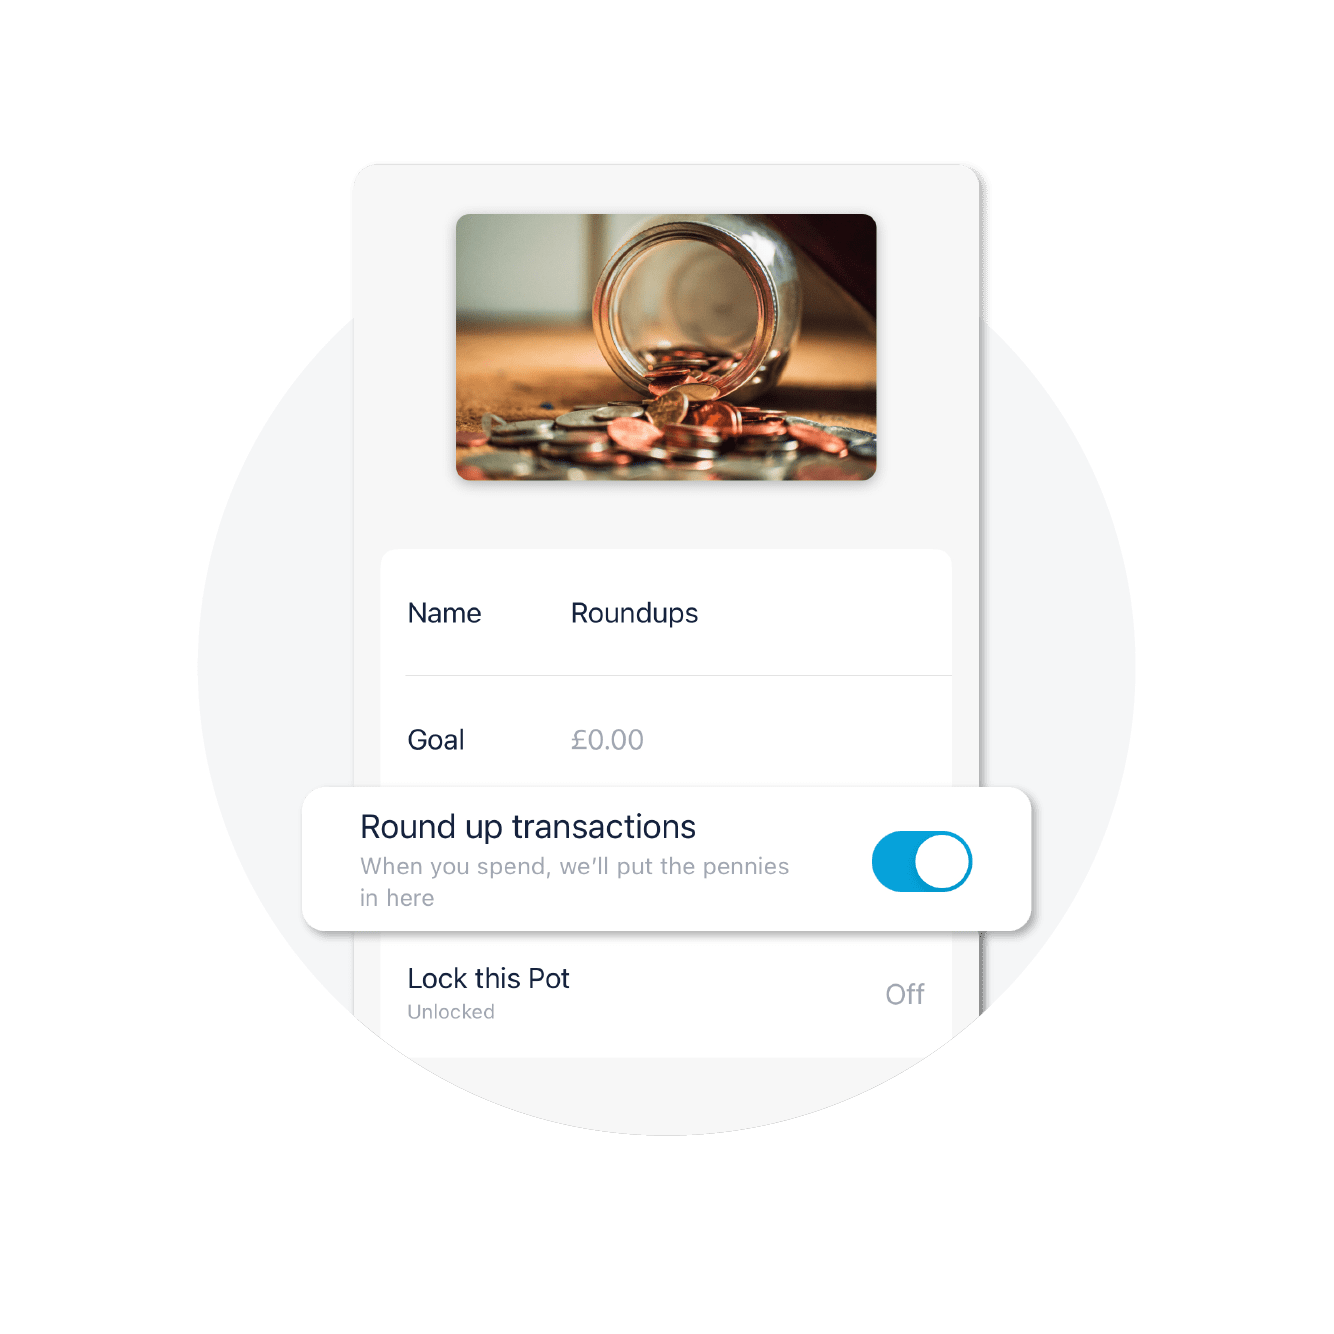 A Pot in the Monzo app, with "round up transactions" emphasised.